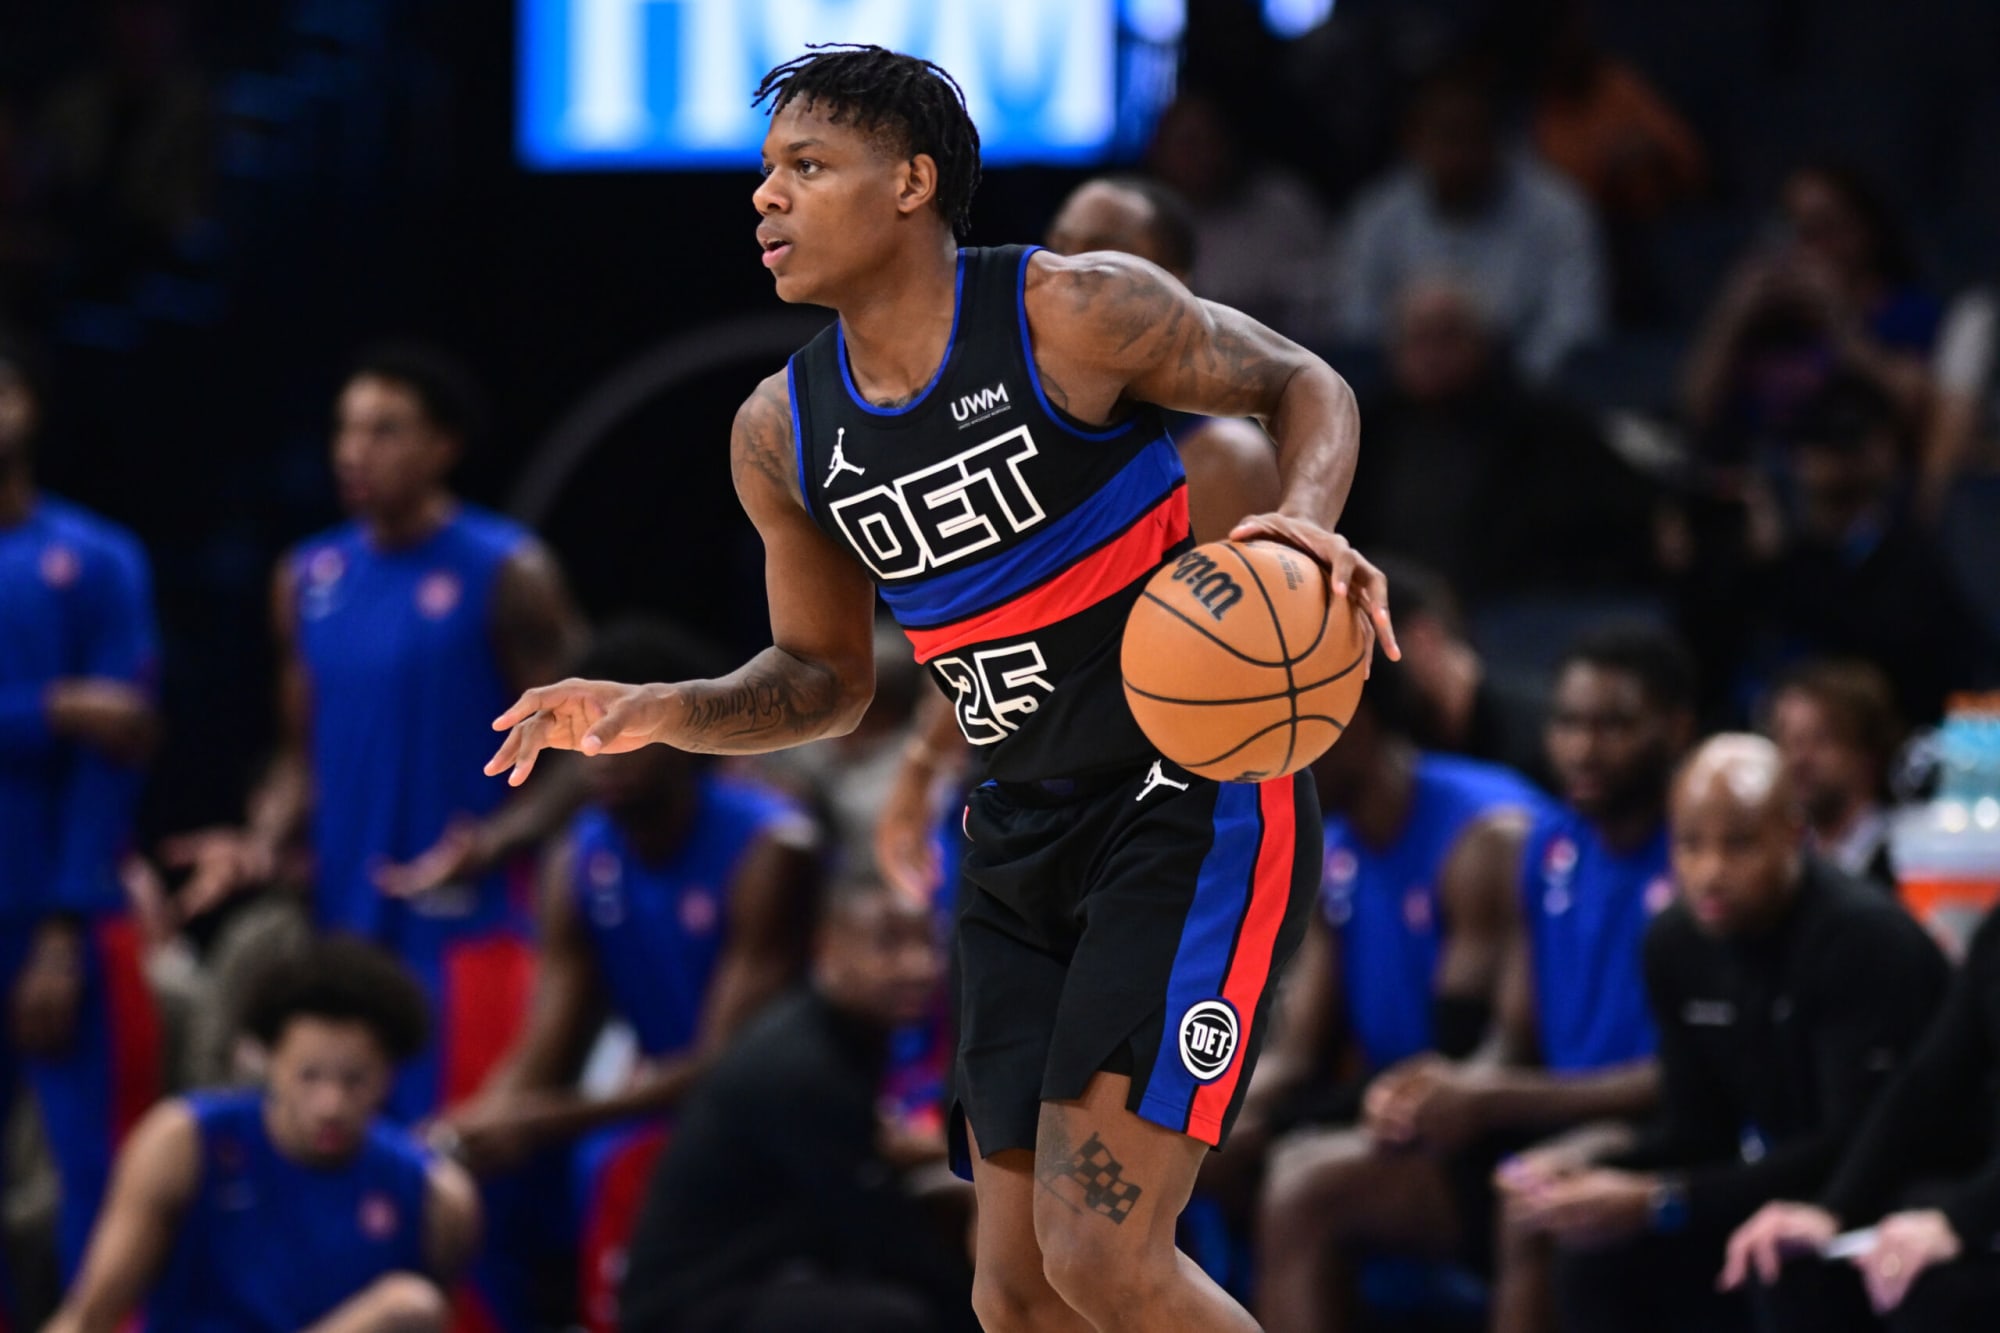 NBA Rookie ladder: Marcus Sasser will keep climbing for the Pistons